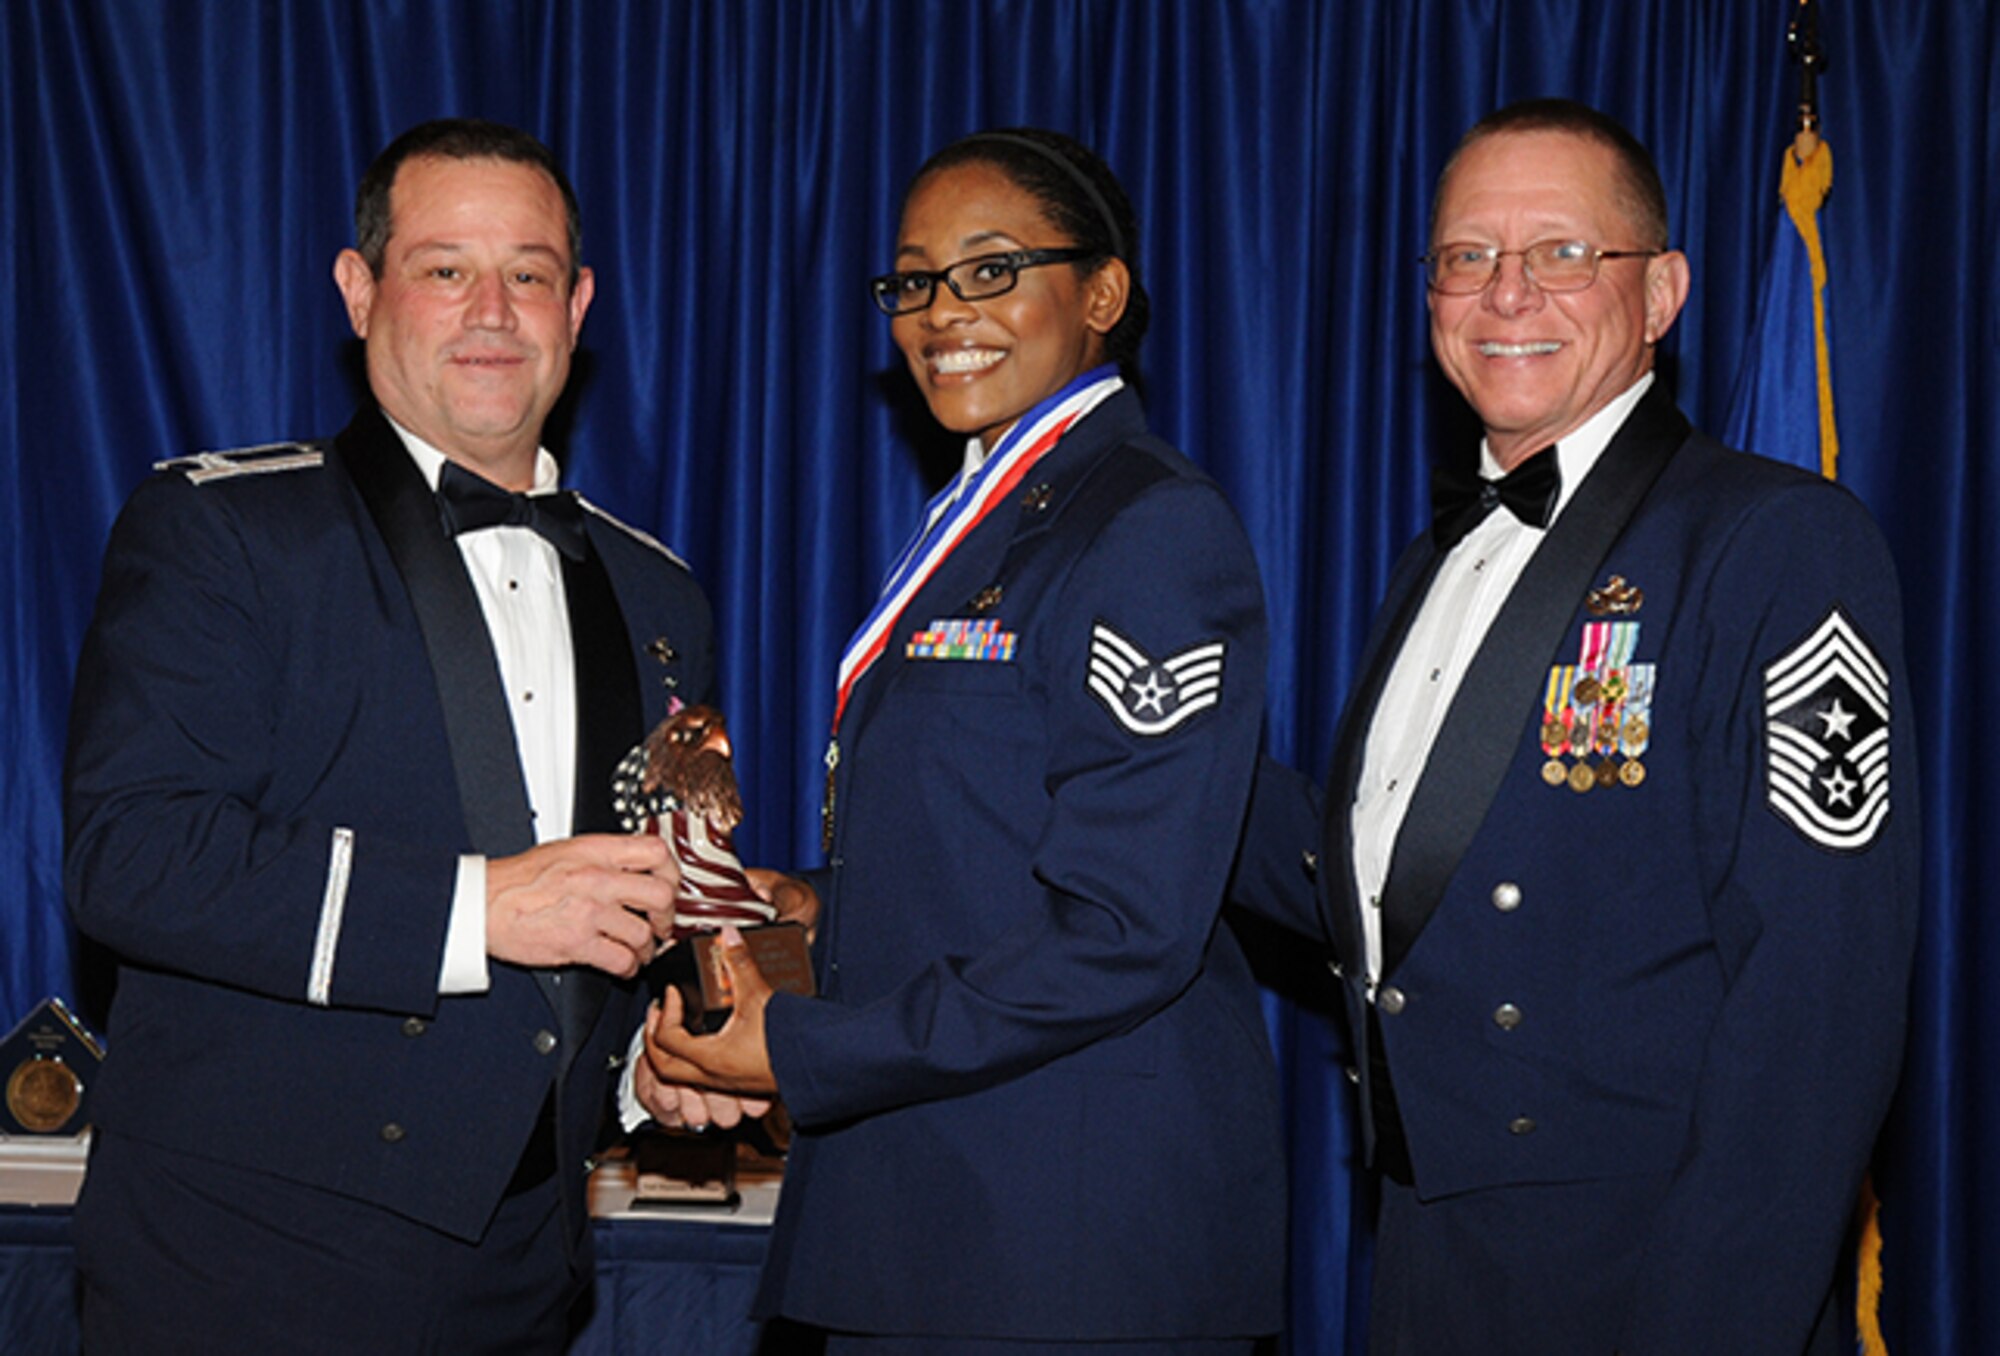 Staff Sgt. Kresston Davis, 908th Security Forces Squadron, was recognized recently as the 2014 Air Force Reserve Command Airman of the Year. Here, Davis is recognized at the 908th Airlift Wing Awards Banquet by Wing Commander Col. Adam Willis, left, and Command Chief Master Sgt. Owen Duke.
